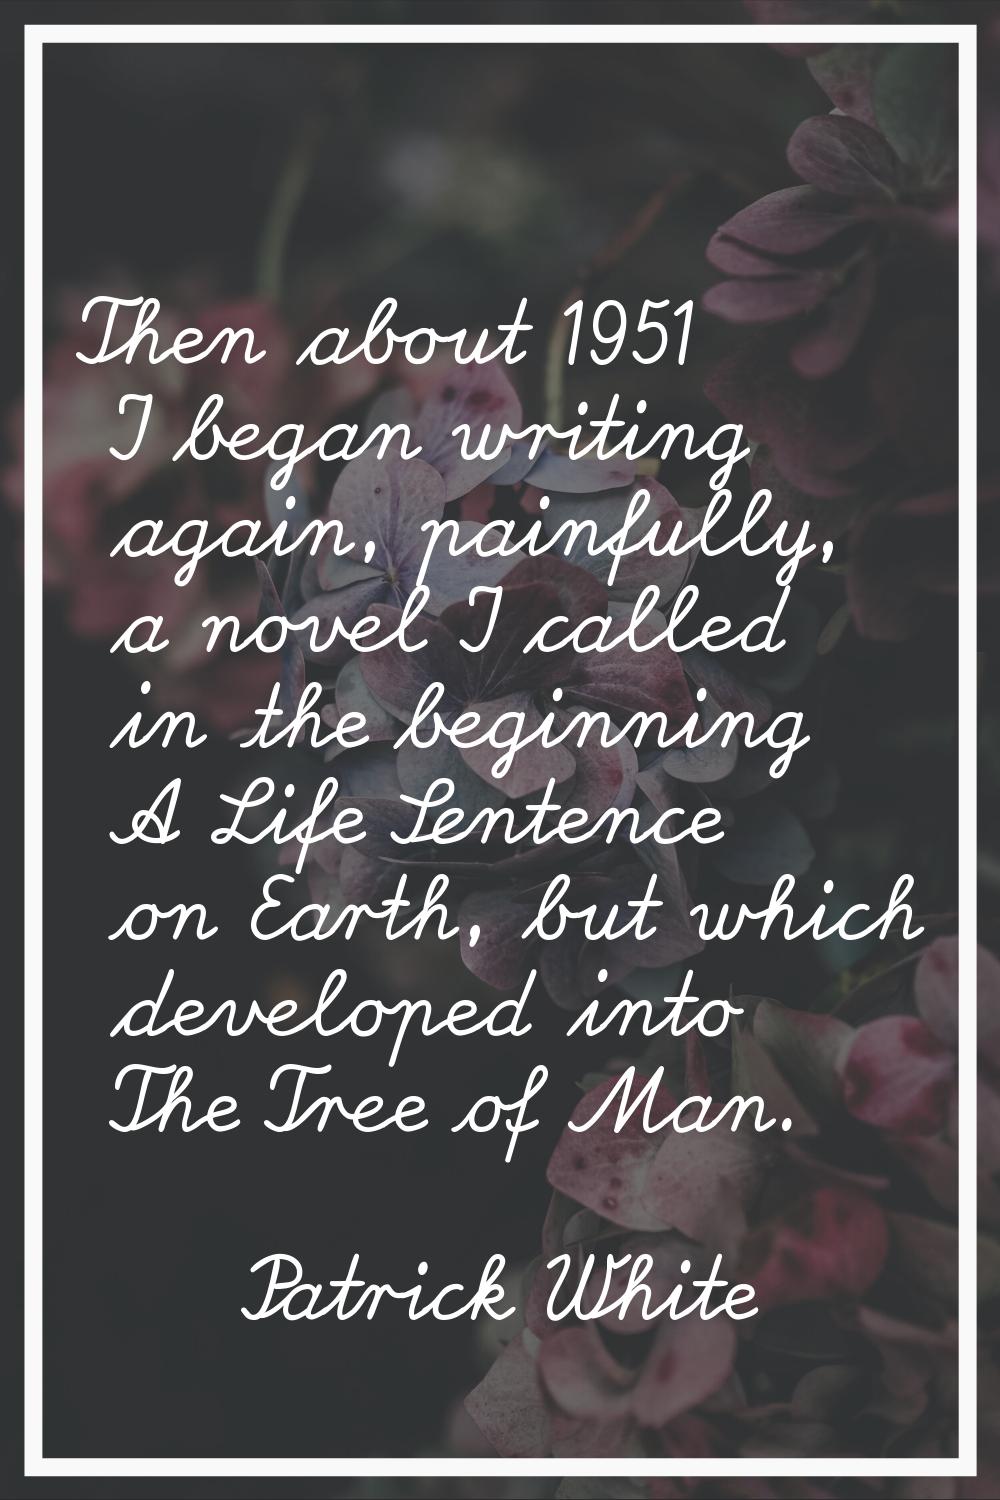 Then about 1951 I began writing again, painfully, a novel I called in the beginning A Life Sentence